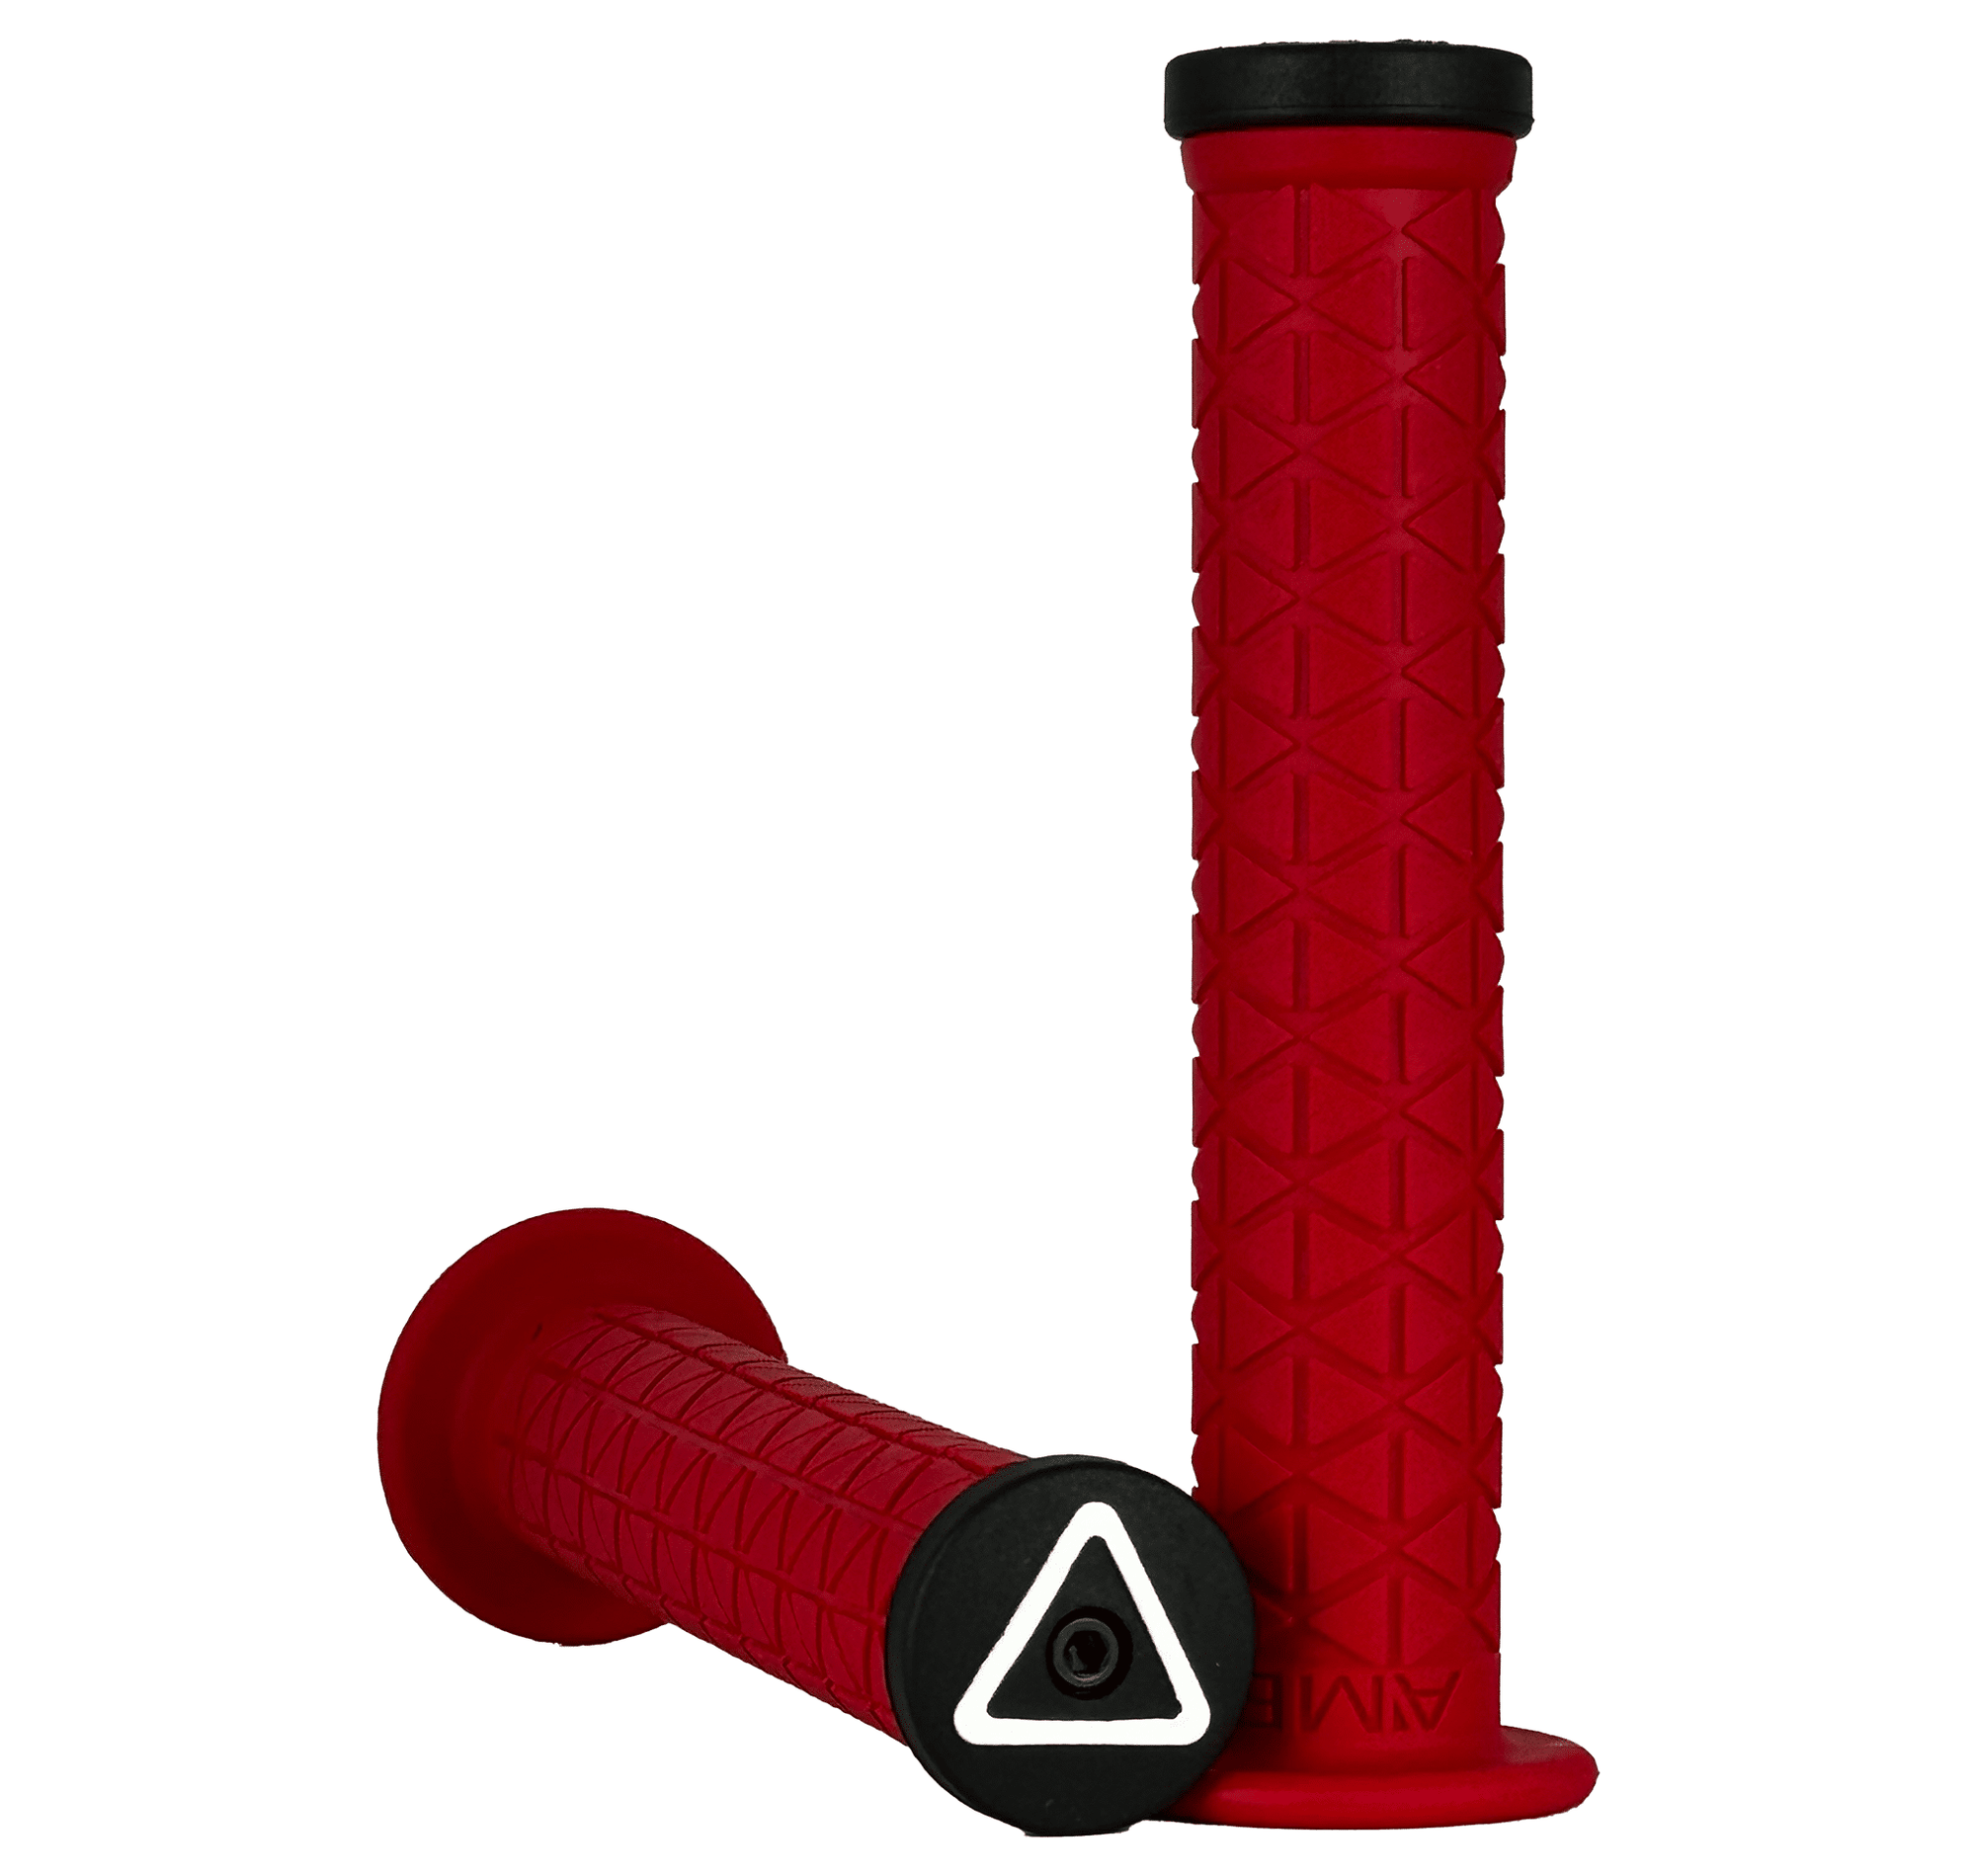 AME Super Tri Long BMX Grips w/ Plugs - Red - USA Made